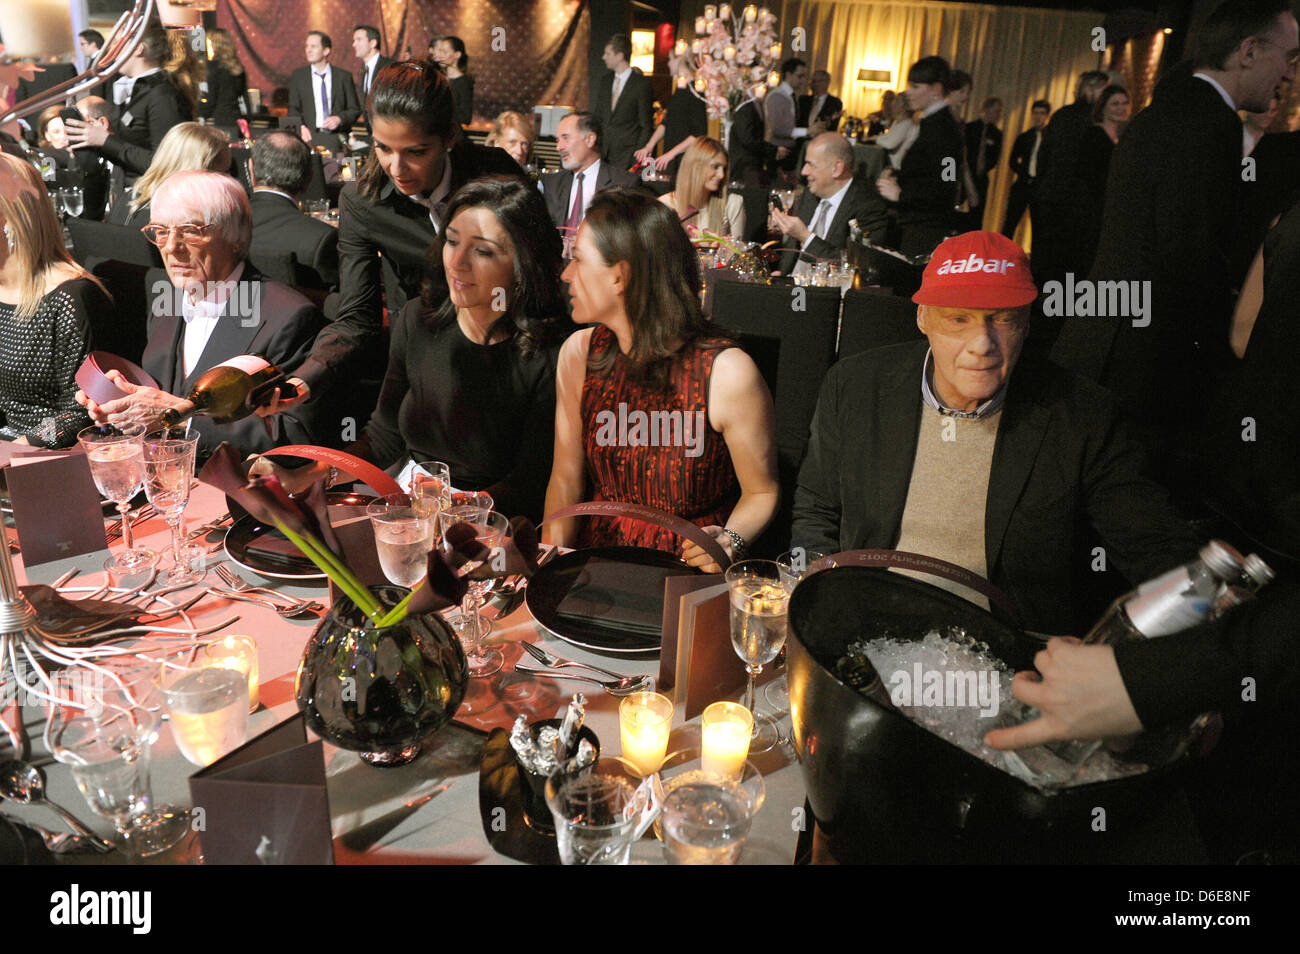 Primary authority of Formula One racing and business magnate Bernie Ecclestone (4-L), his partner Fabiana Flosi, Former Austrian race driver Niki Lauda (R) and his wife Birgit (2-R) sit at the table at the Kitz Race Party, an event that traditionally takes place after the legendary Hahnenkamm downhill alpine ski race, in Kitzbuehel, Austria, 21 January 2012. The party is a meeting  Stock Photo